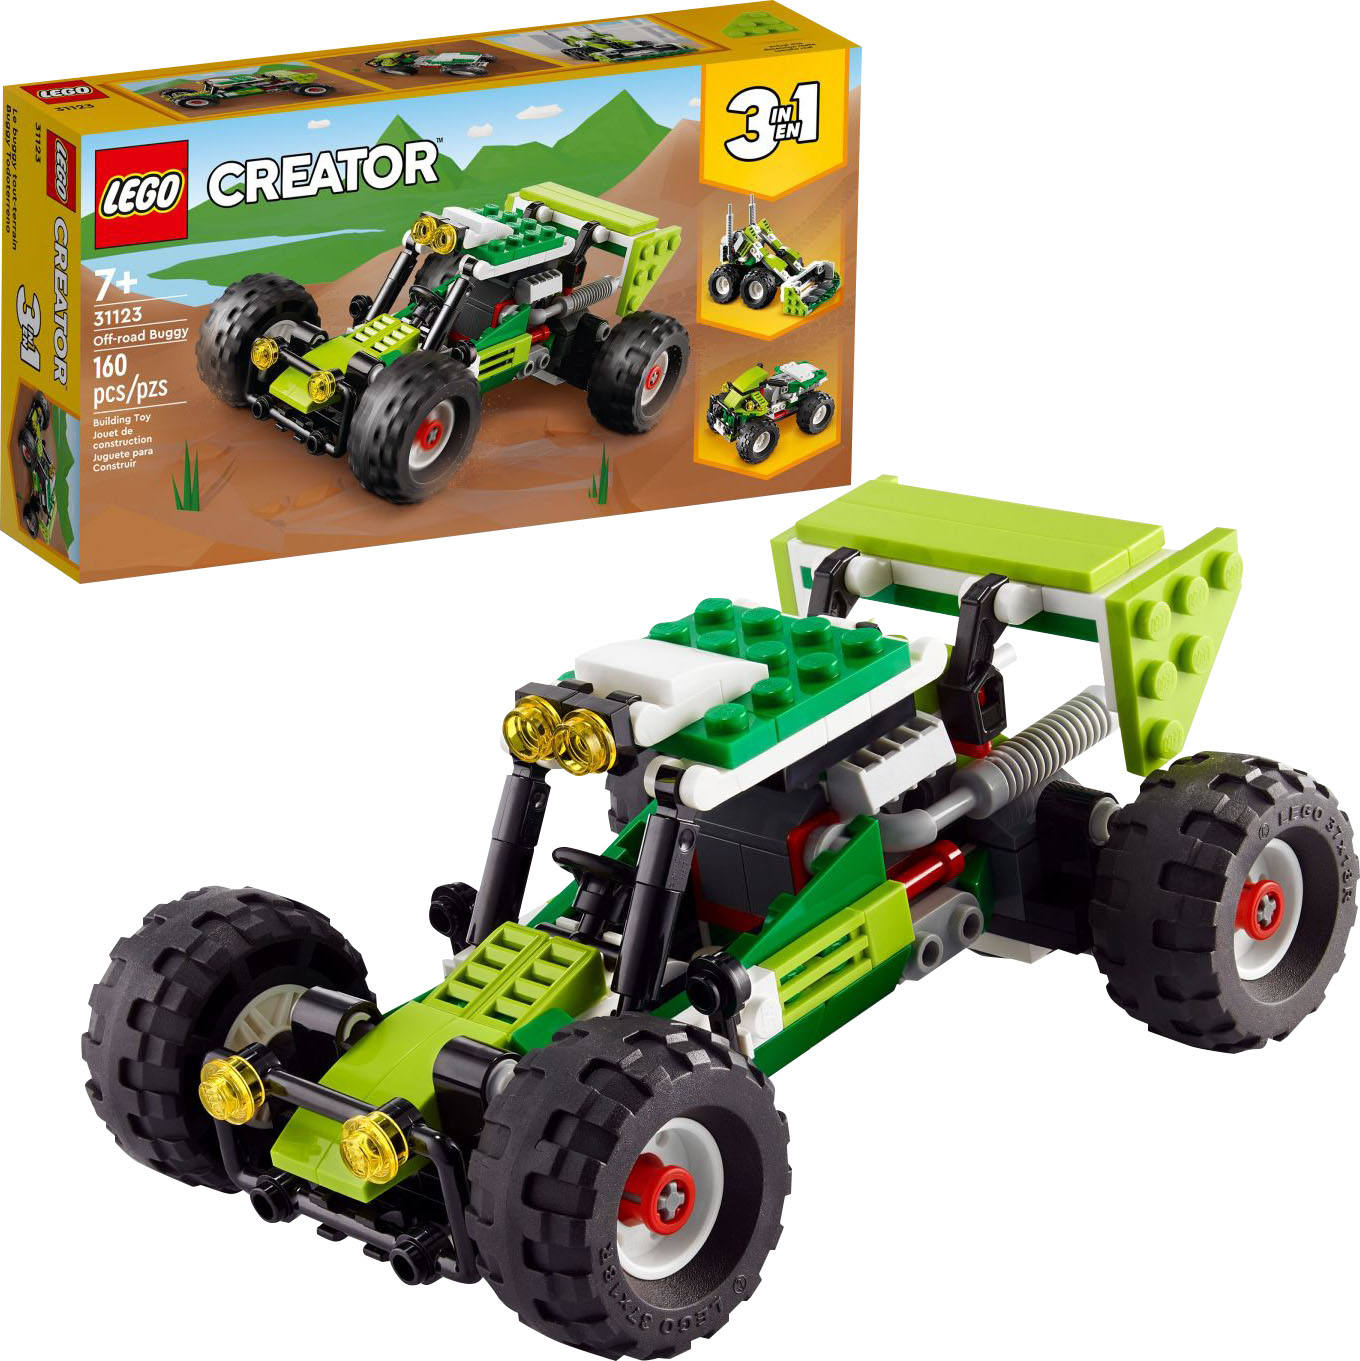 LEGO Creator 3in1 Off-road Buggy 31123 Building Kit (160 Pieces) 6371101 -  Best Buy